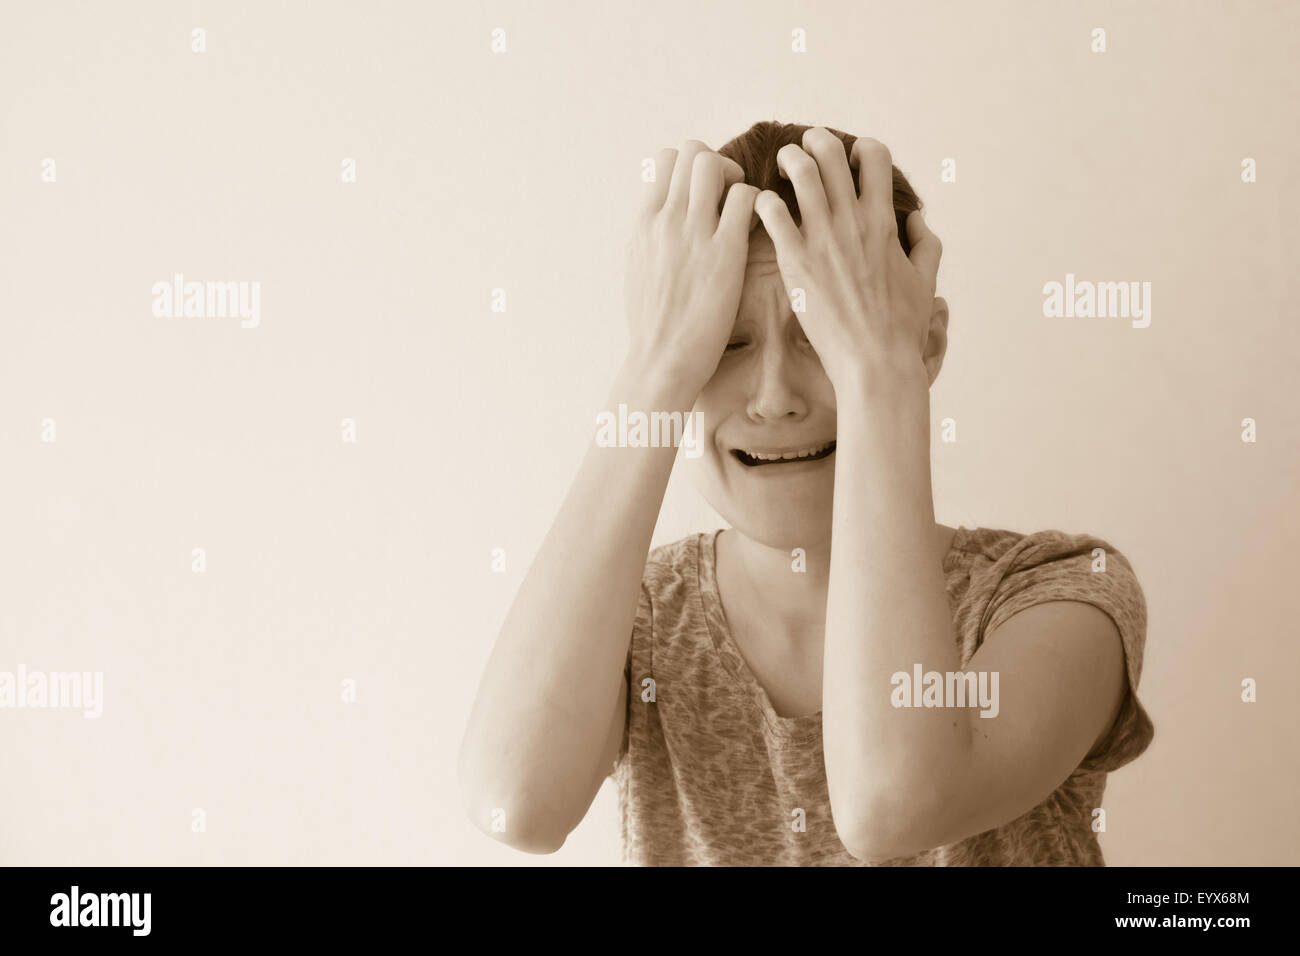 Crying depressed sad abuse young woman, dramatic portrait Stock Photo